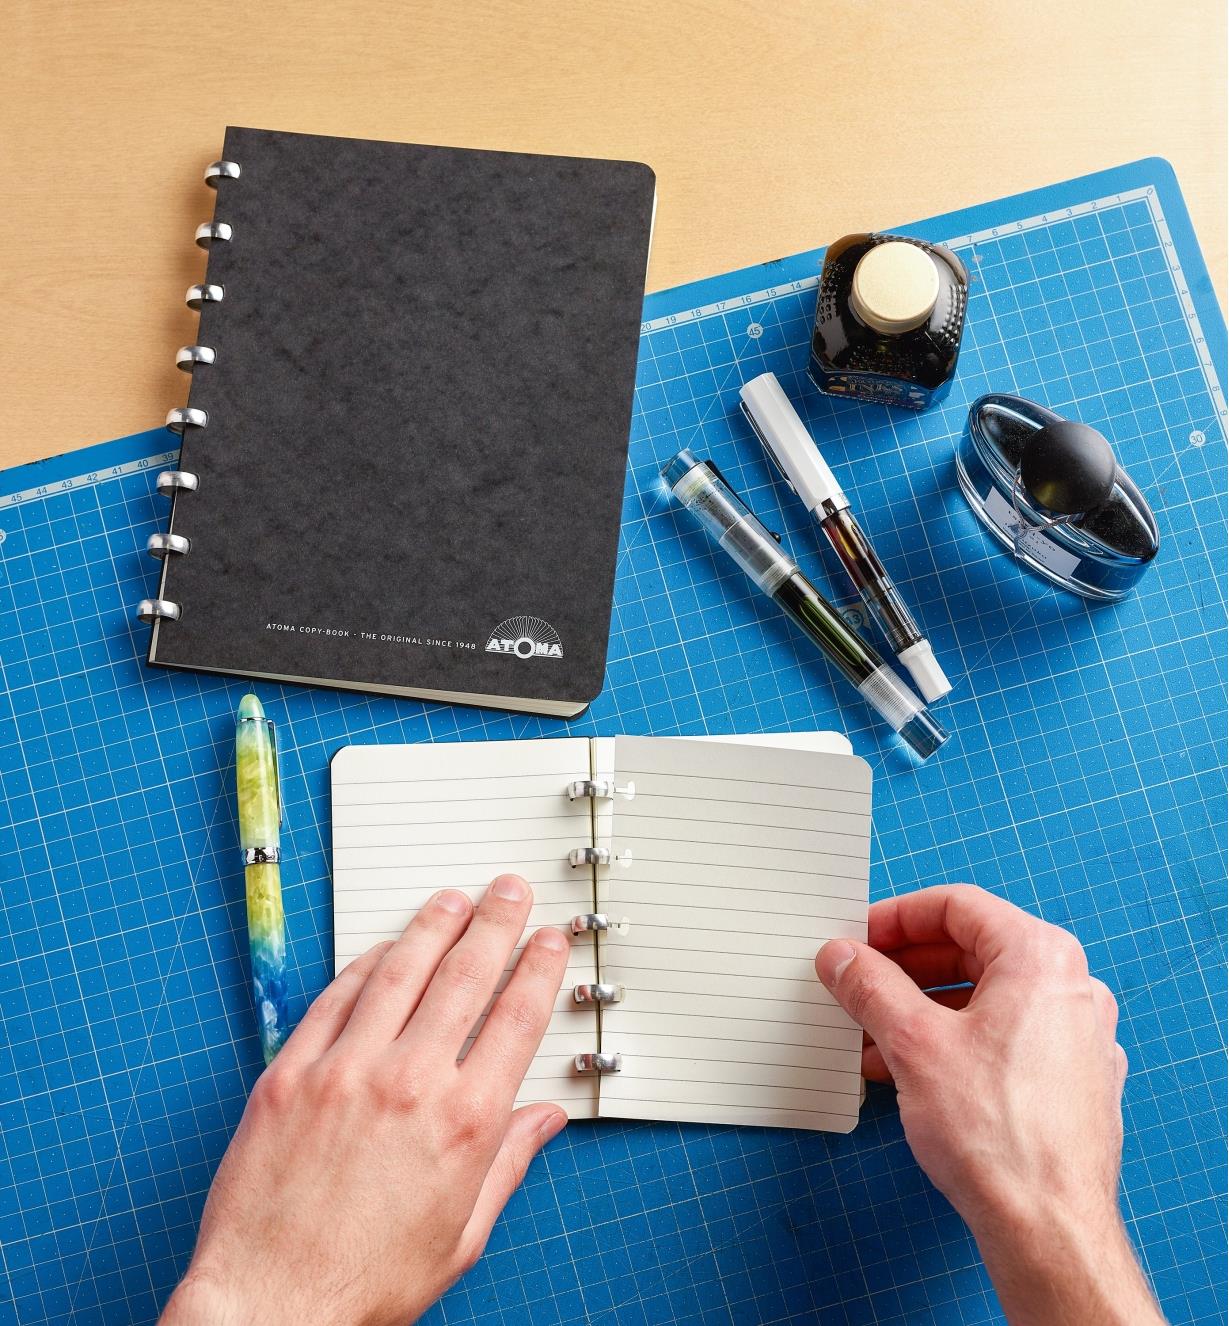 Removing a blank page from the small Atoma notebook, with the large notebook sitting close by